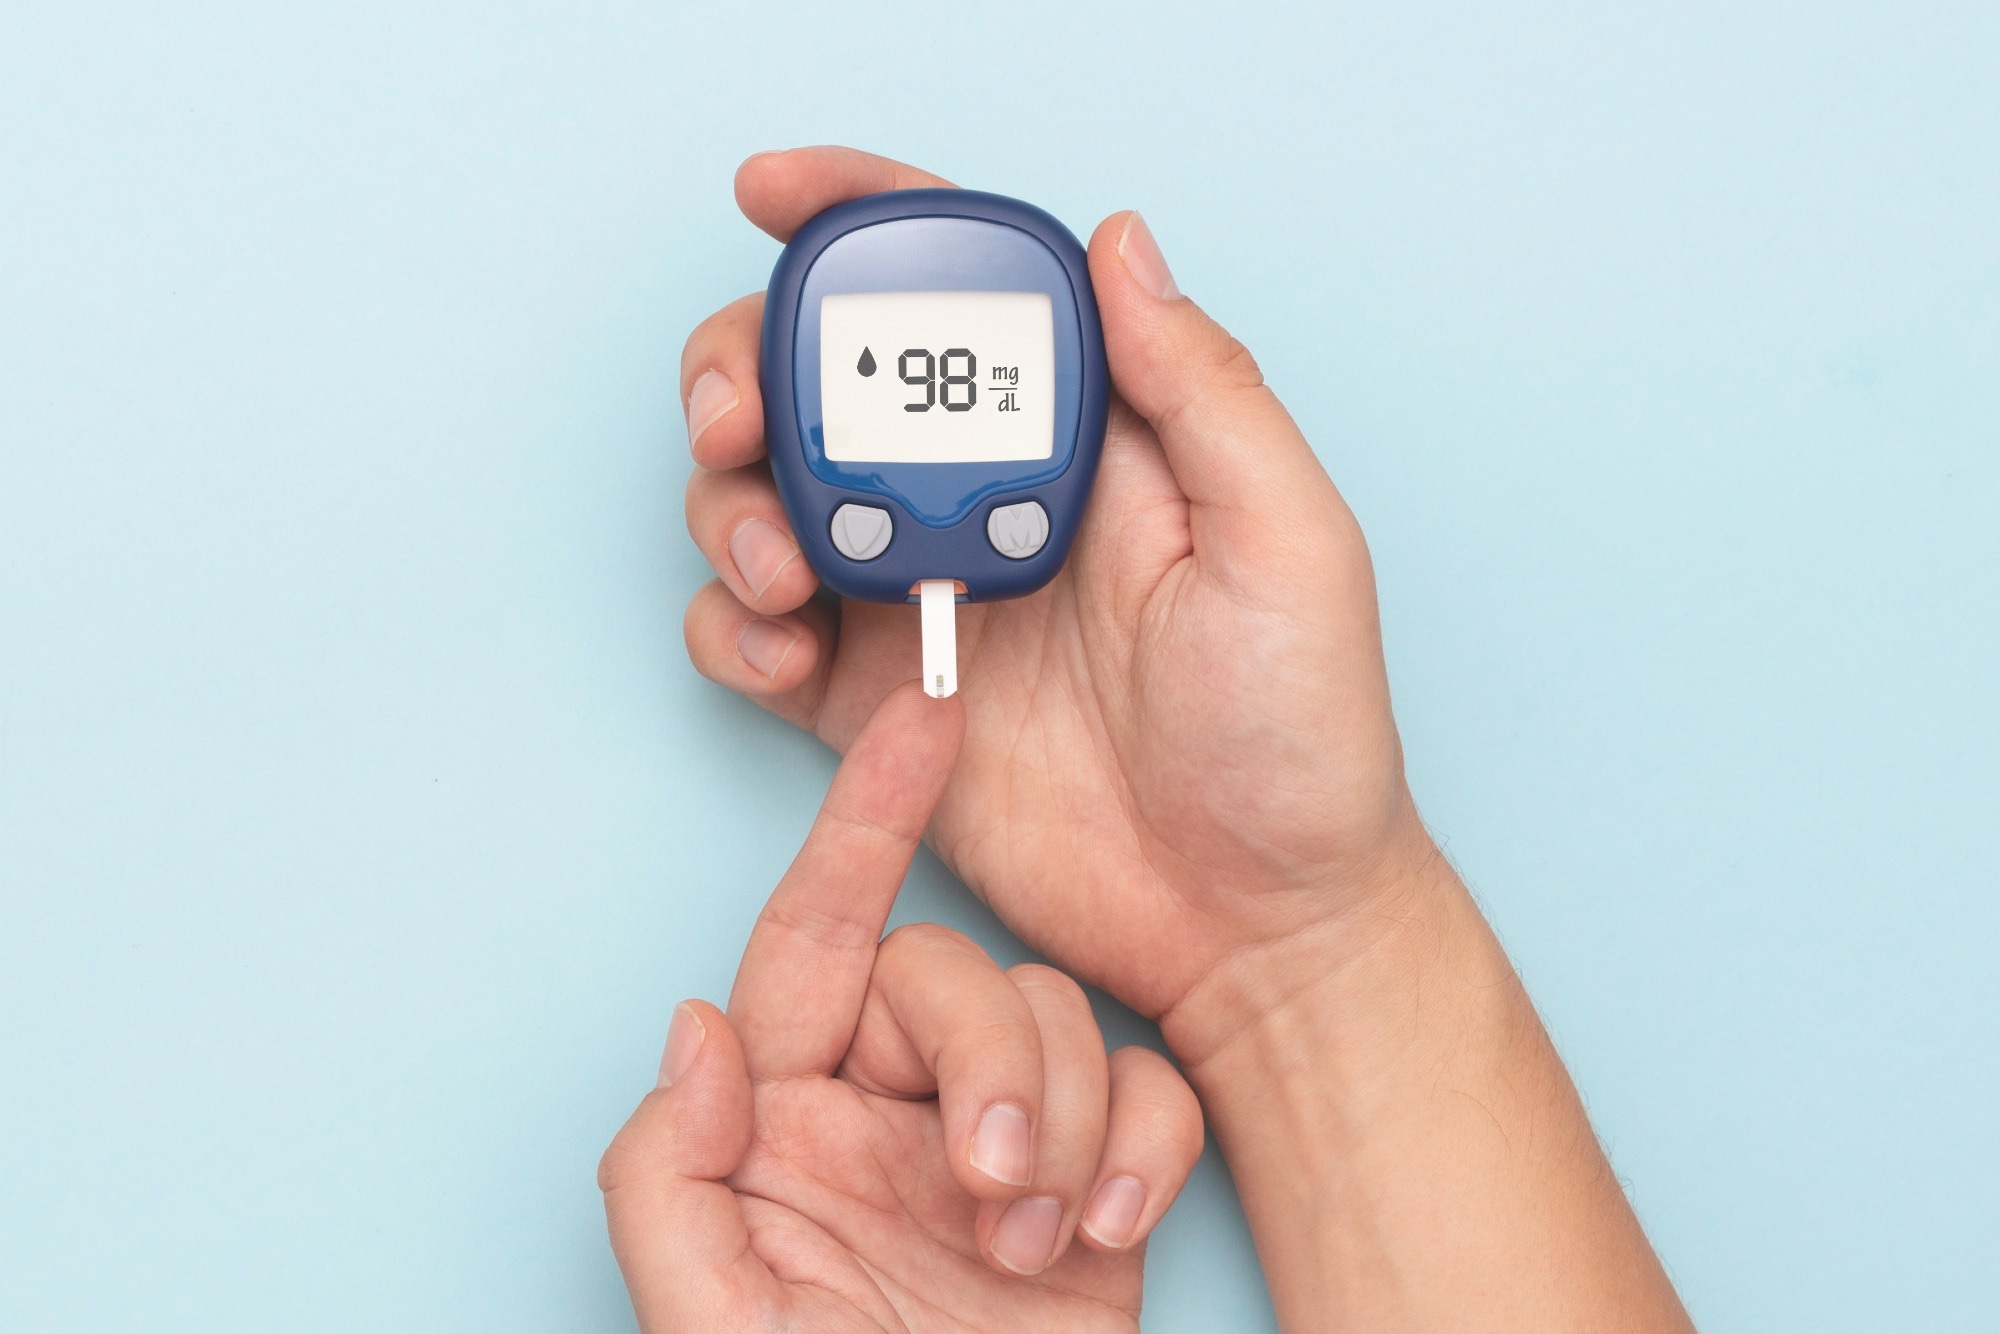 Study: Risk for newly diagnosed diabetes after COVID-19: a systematic review and meta-analysis. Image Credit: Proxima Studio / Shutterstock